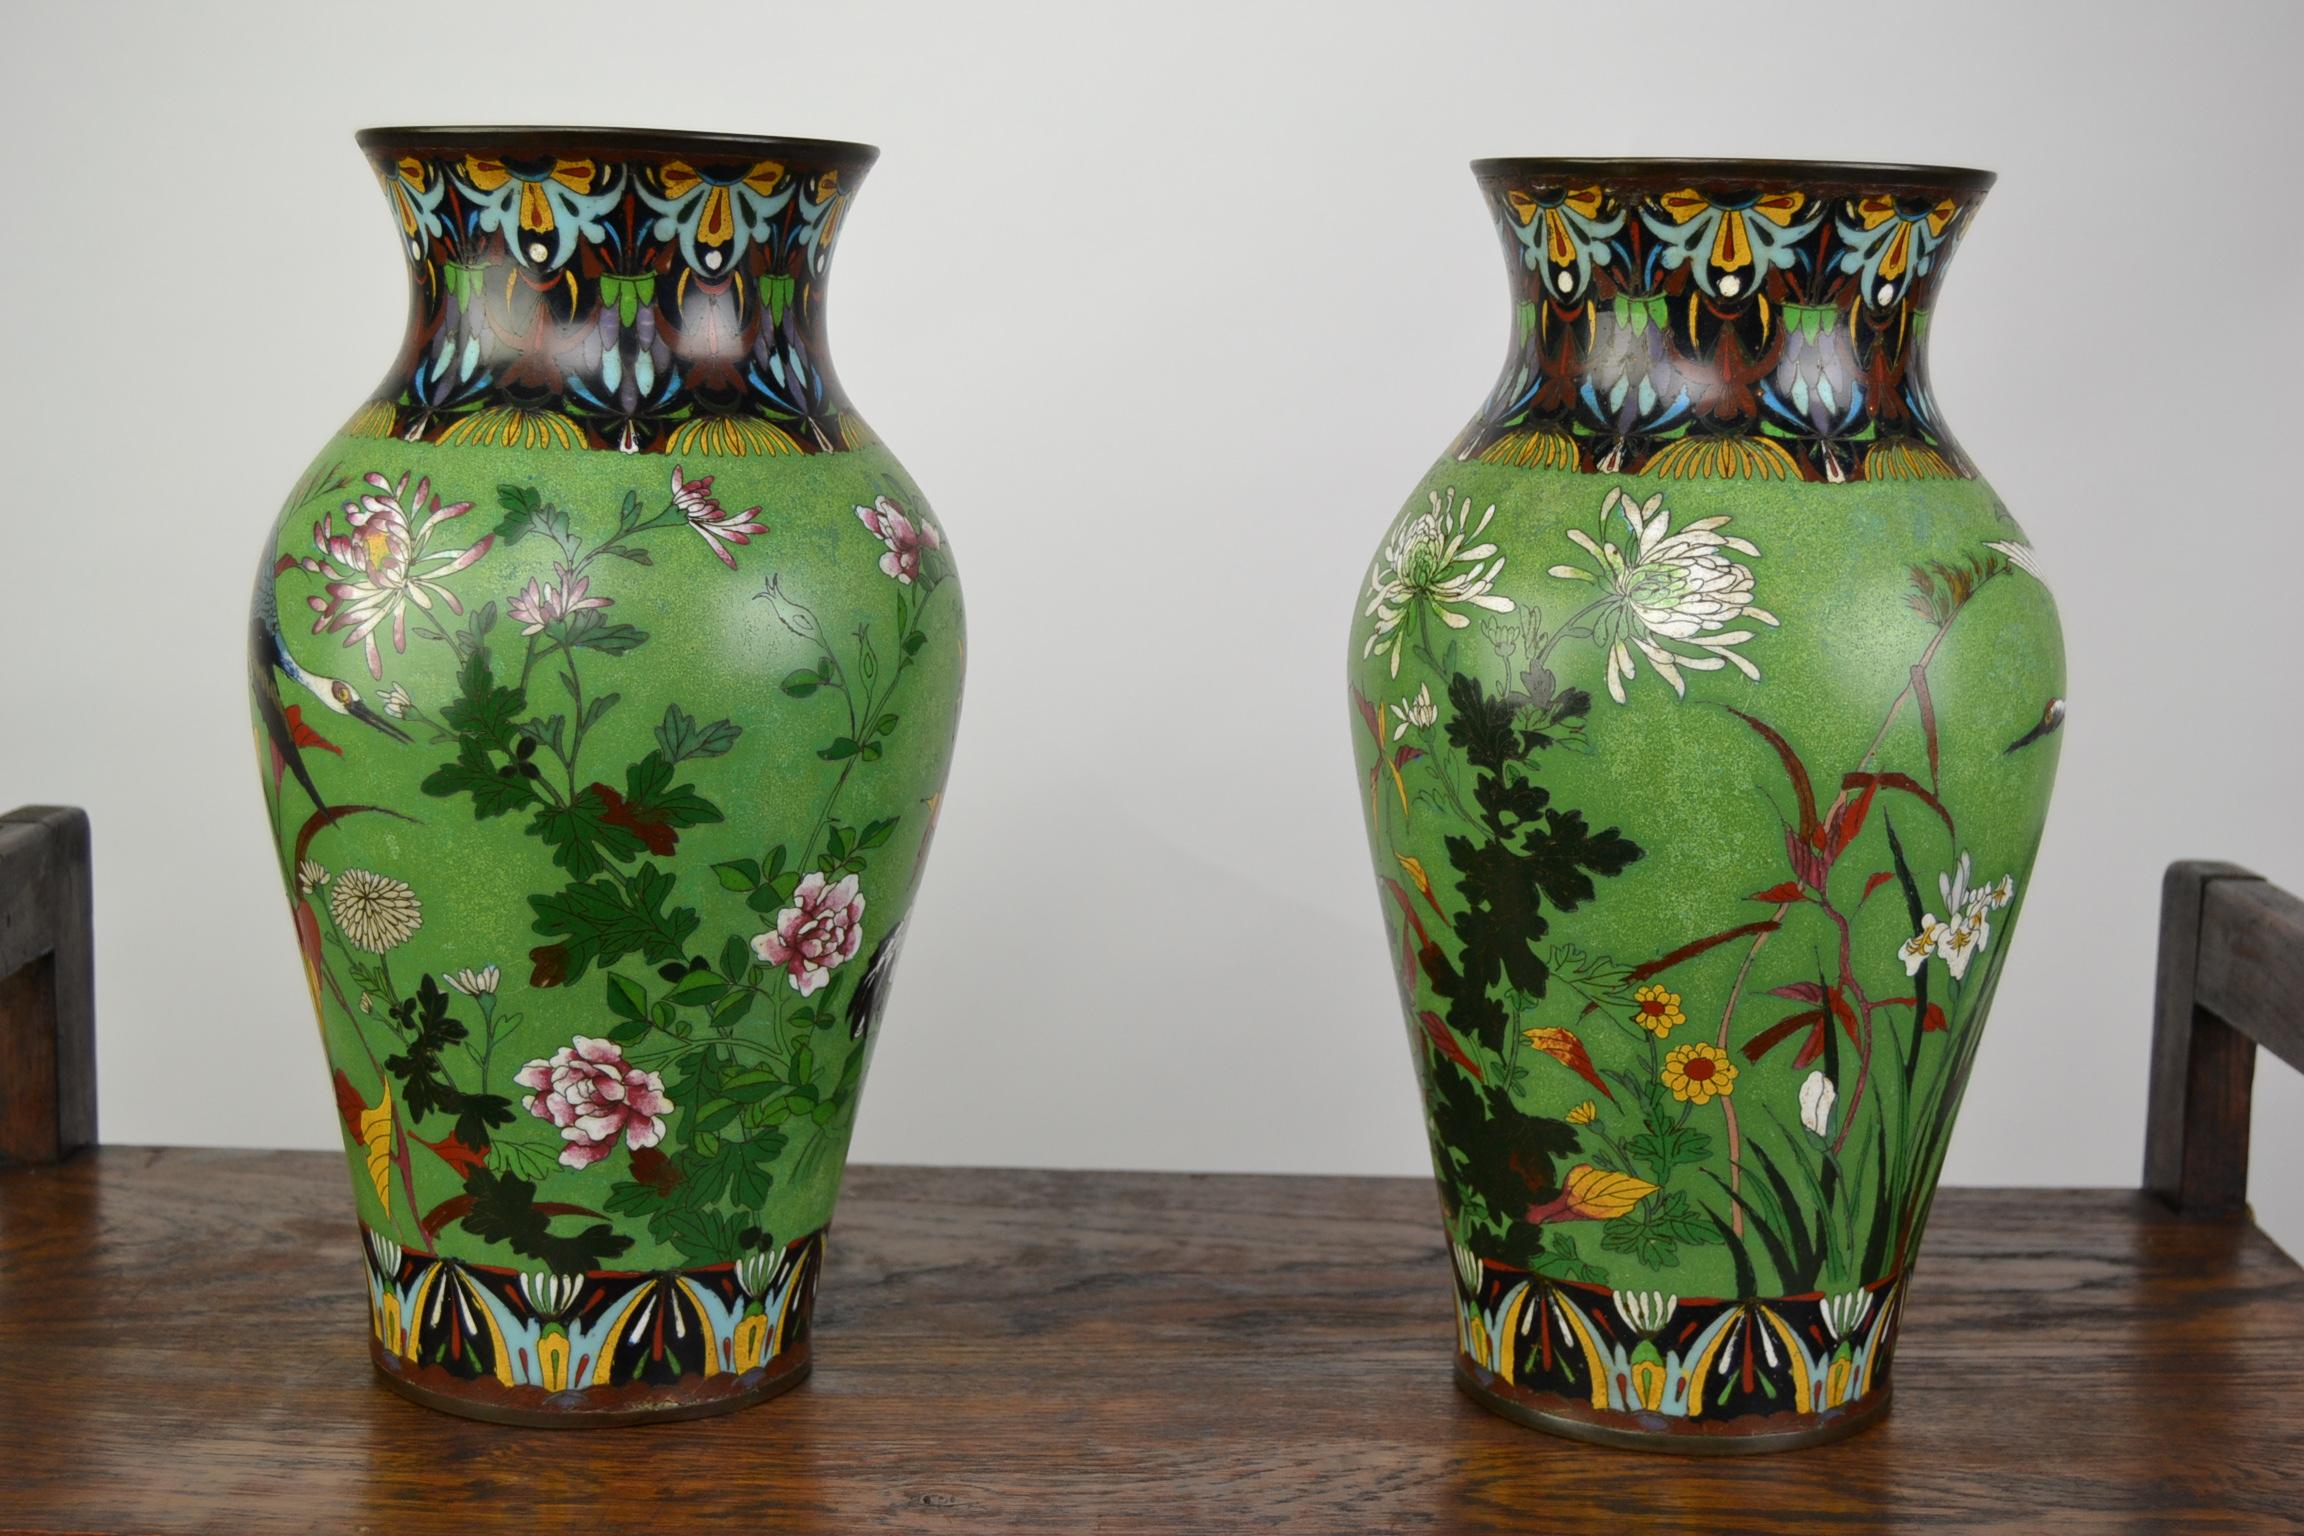 20th Century Pair of Japanese Cloisonne Enamel on Copper Vases with Crane Birds and Flowers 